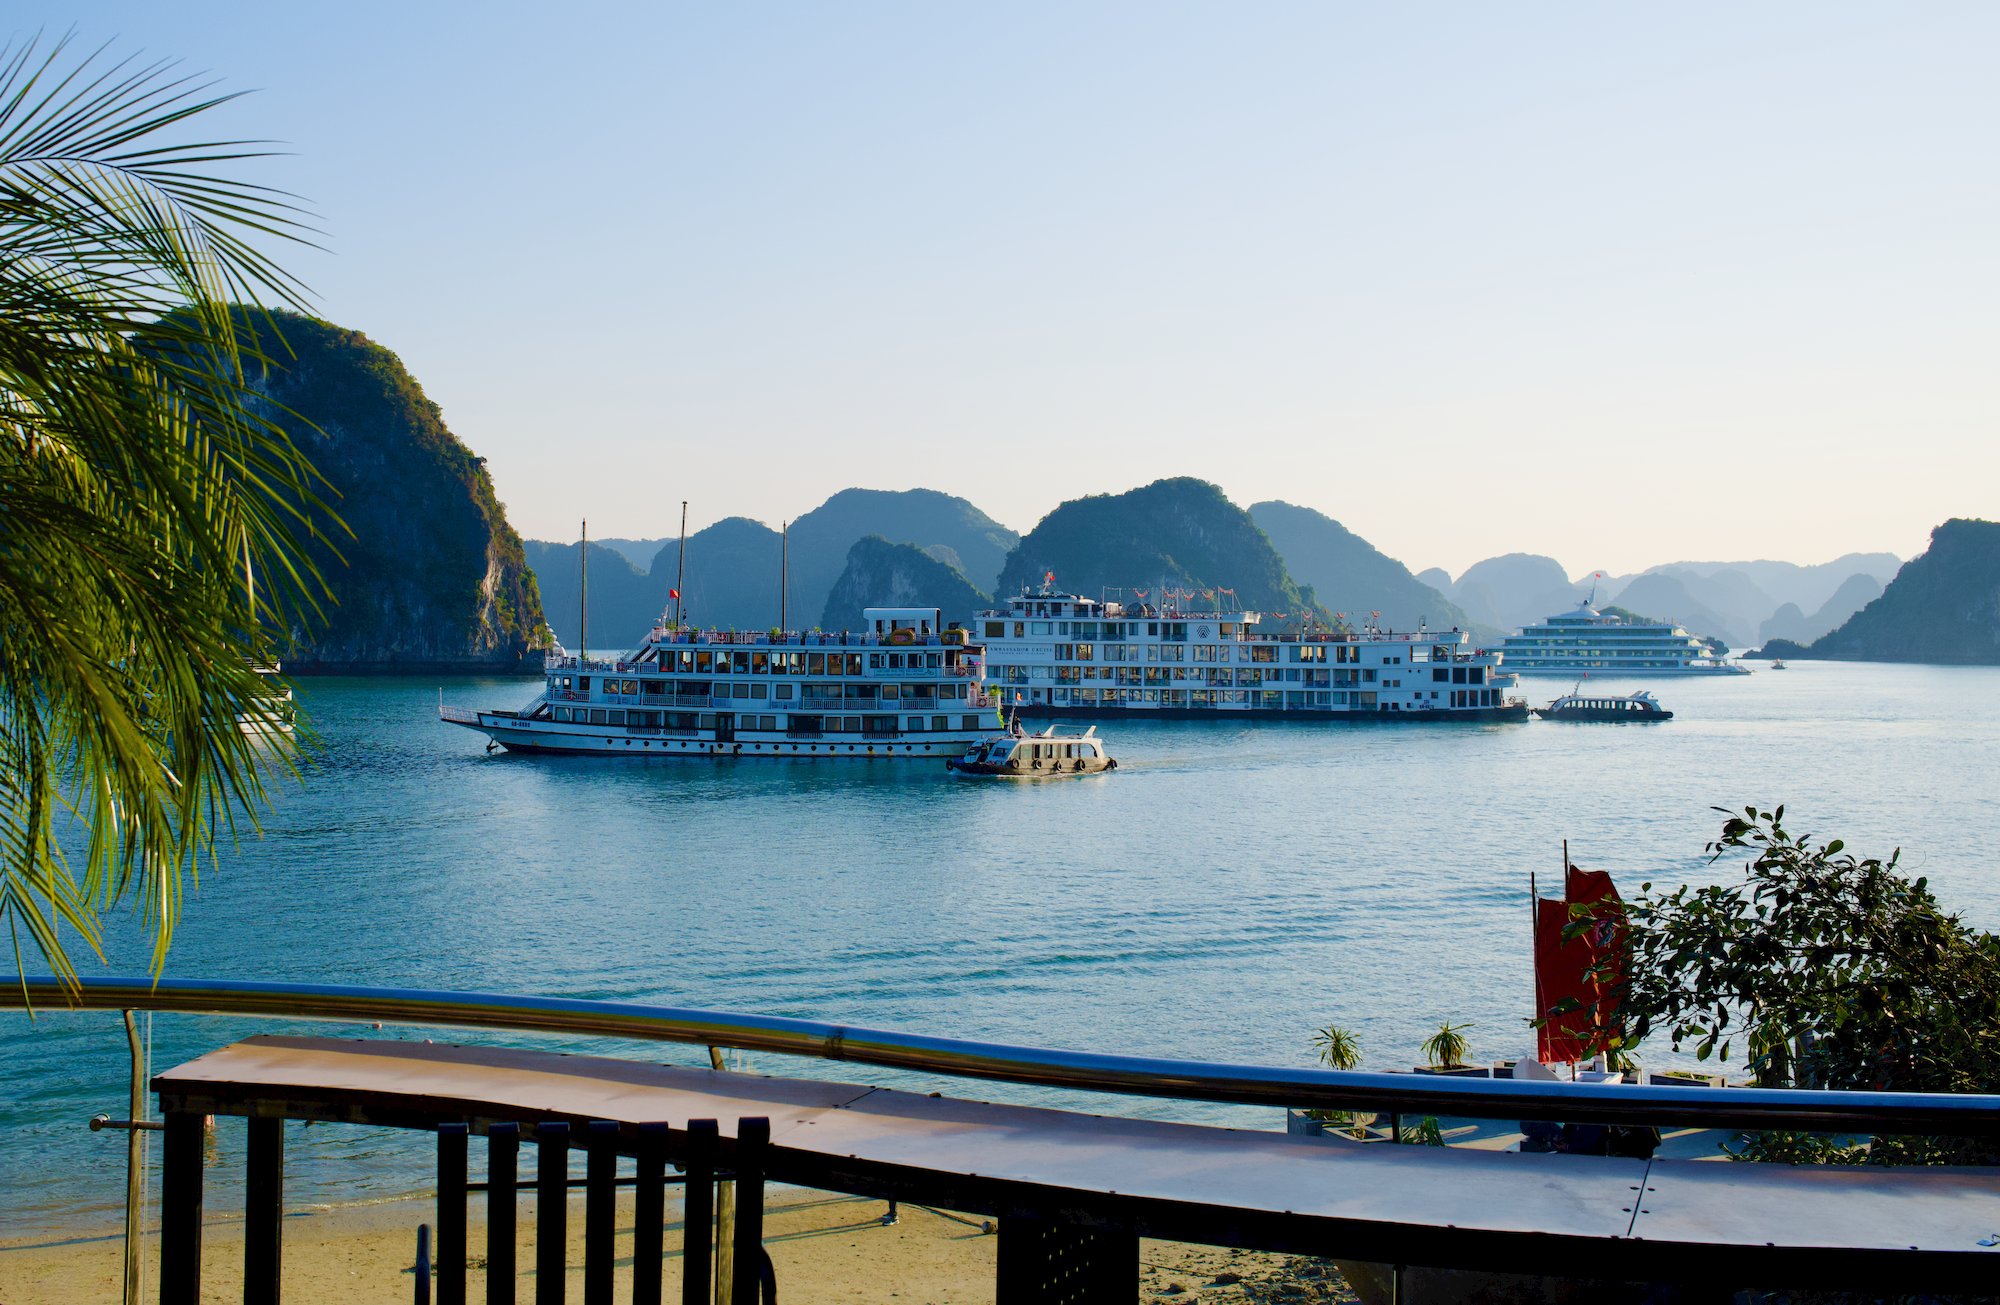 A view of Ha Long Bay from Titop Island